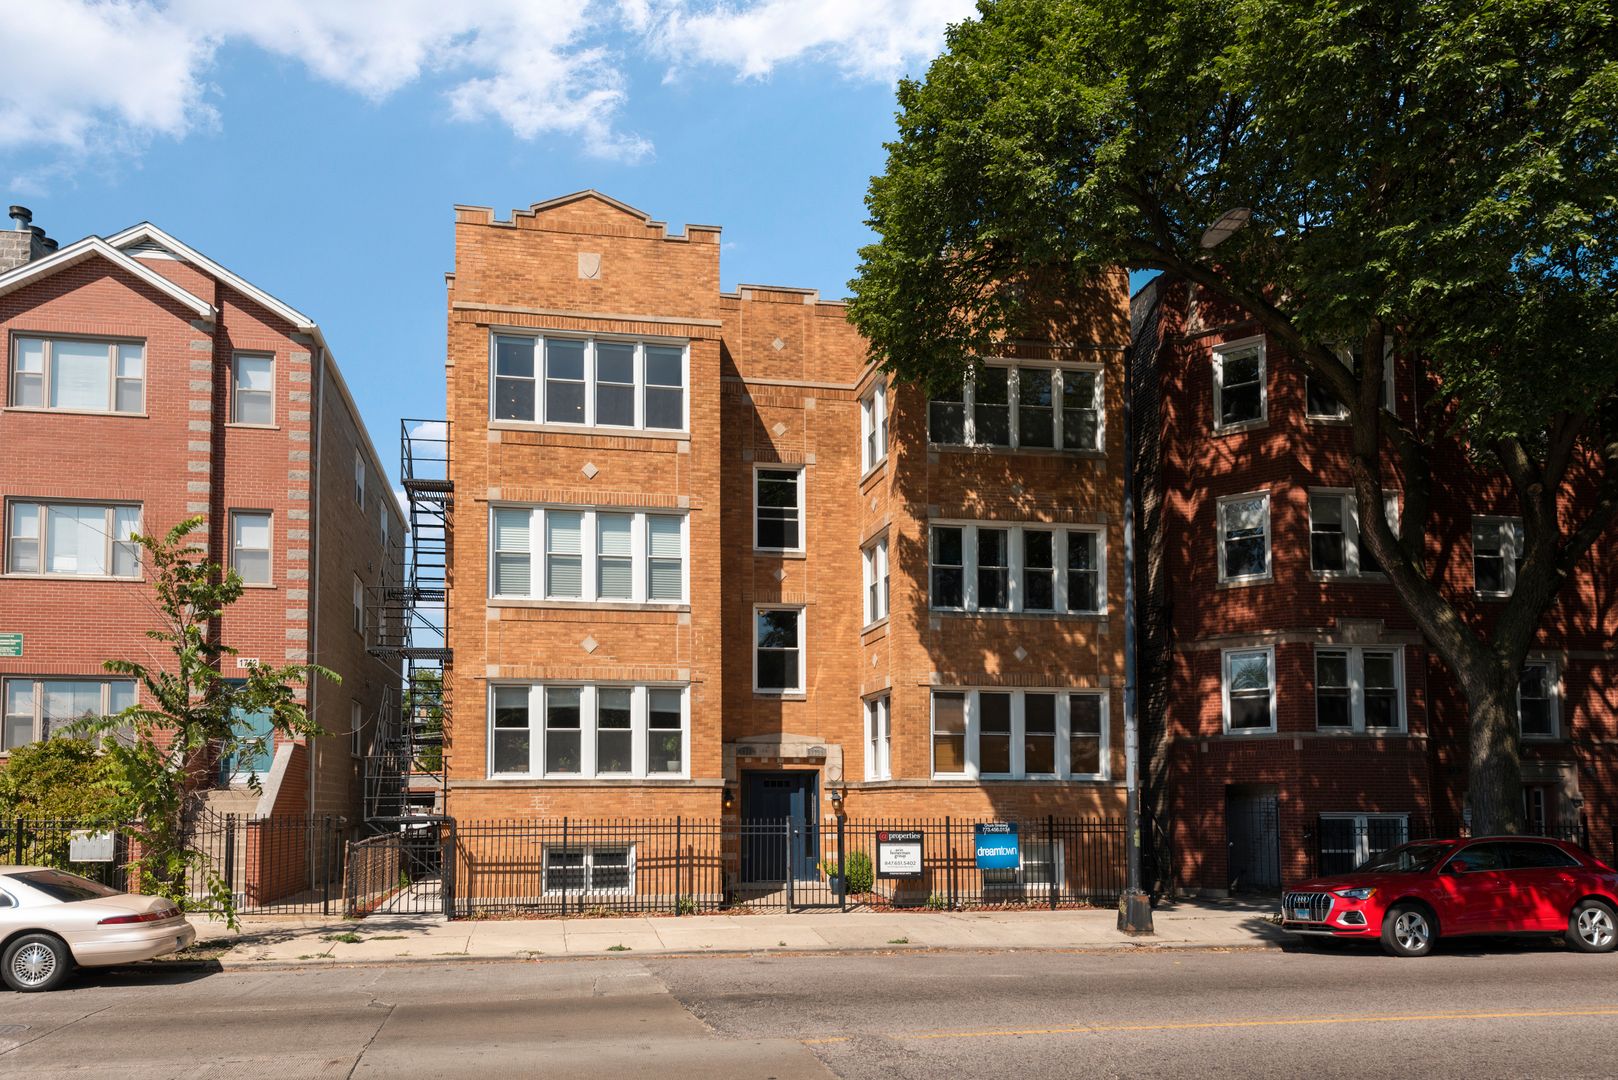 Main Photo: 1740 W FOSTER Avenue Unit 3F in Chicago: CHI - Edgewater Residential Lease for sale ()  : MLS®# 11628904